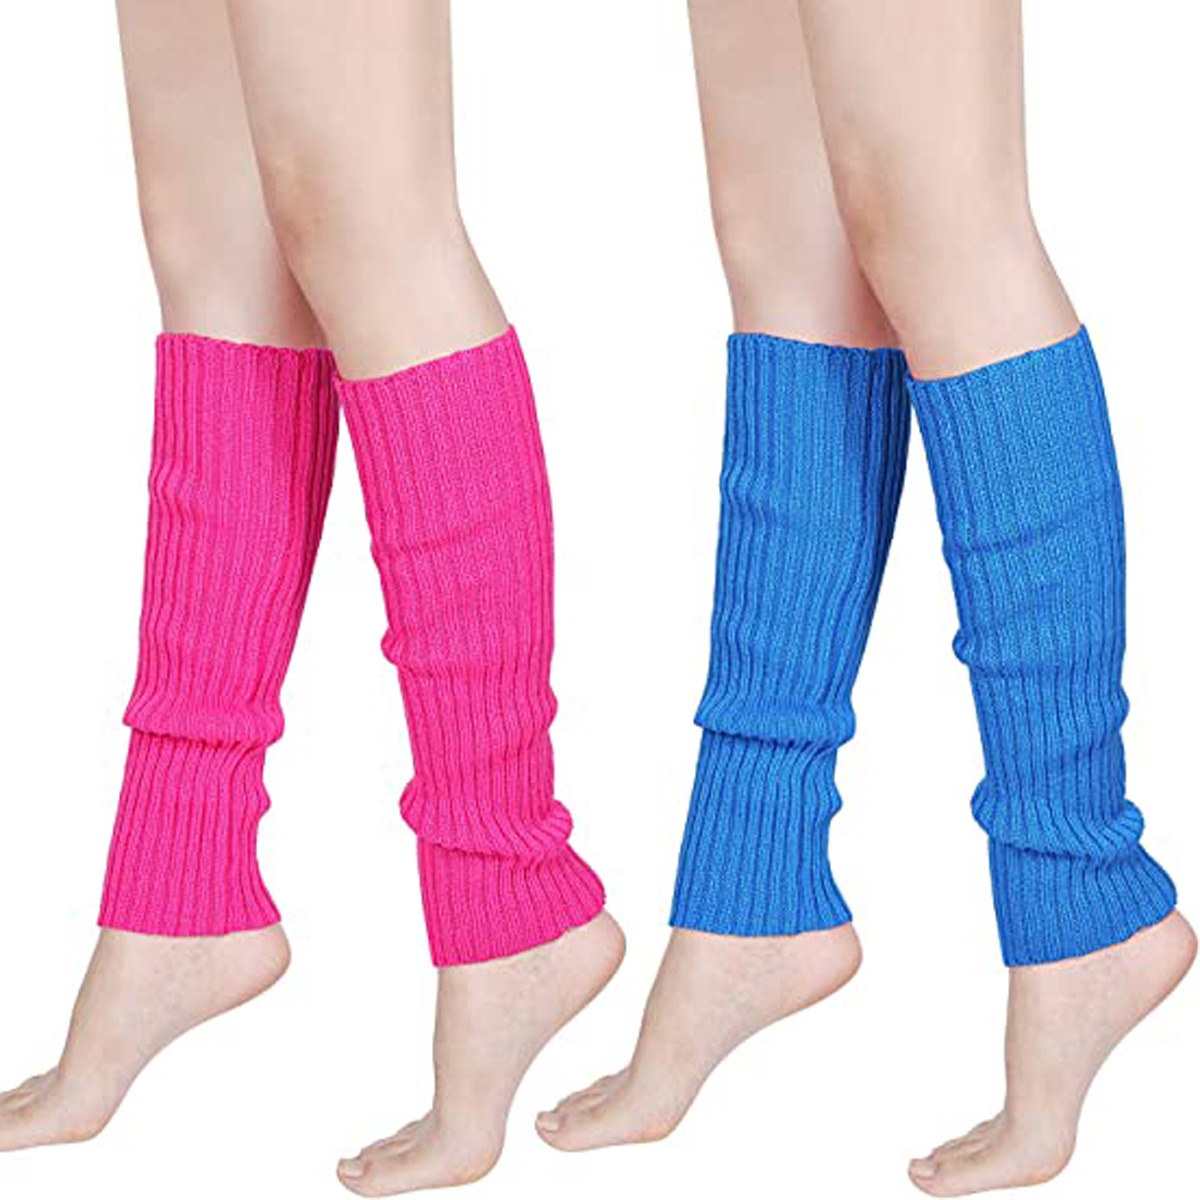 Clothirily Leg Warmers - Fashion Knit Neon Leg Warmers for Women 80s Sports  Party Yoga Accessories